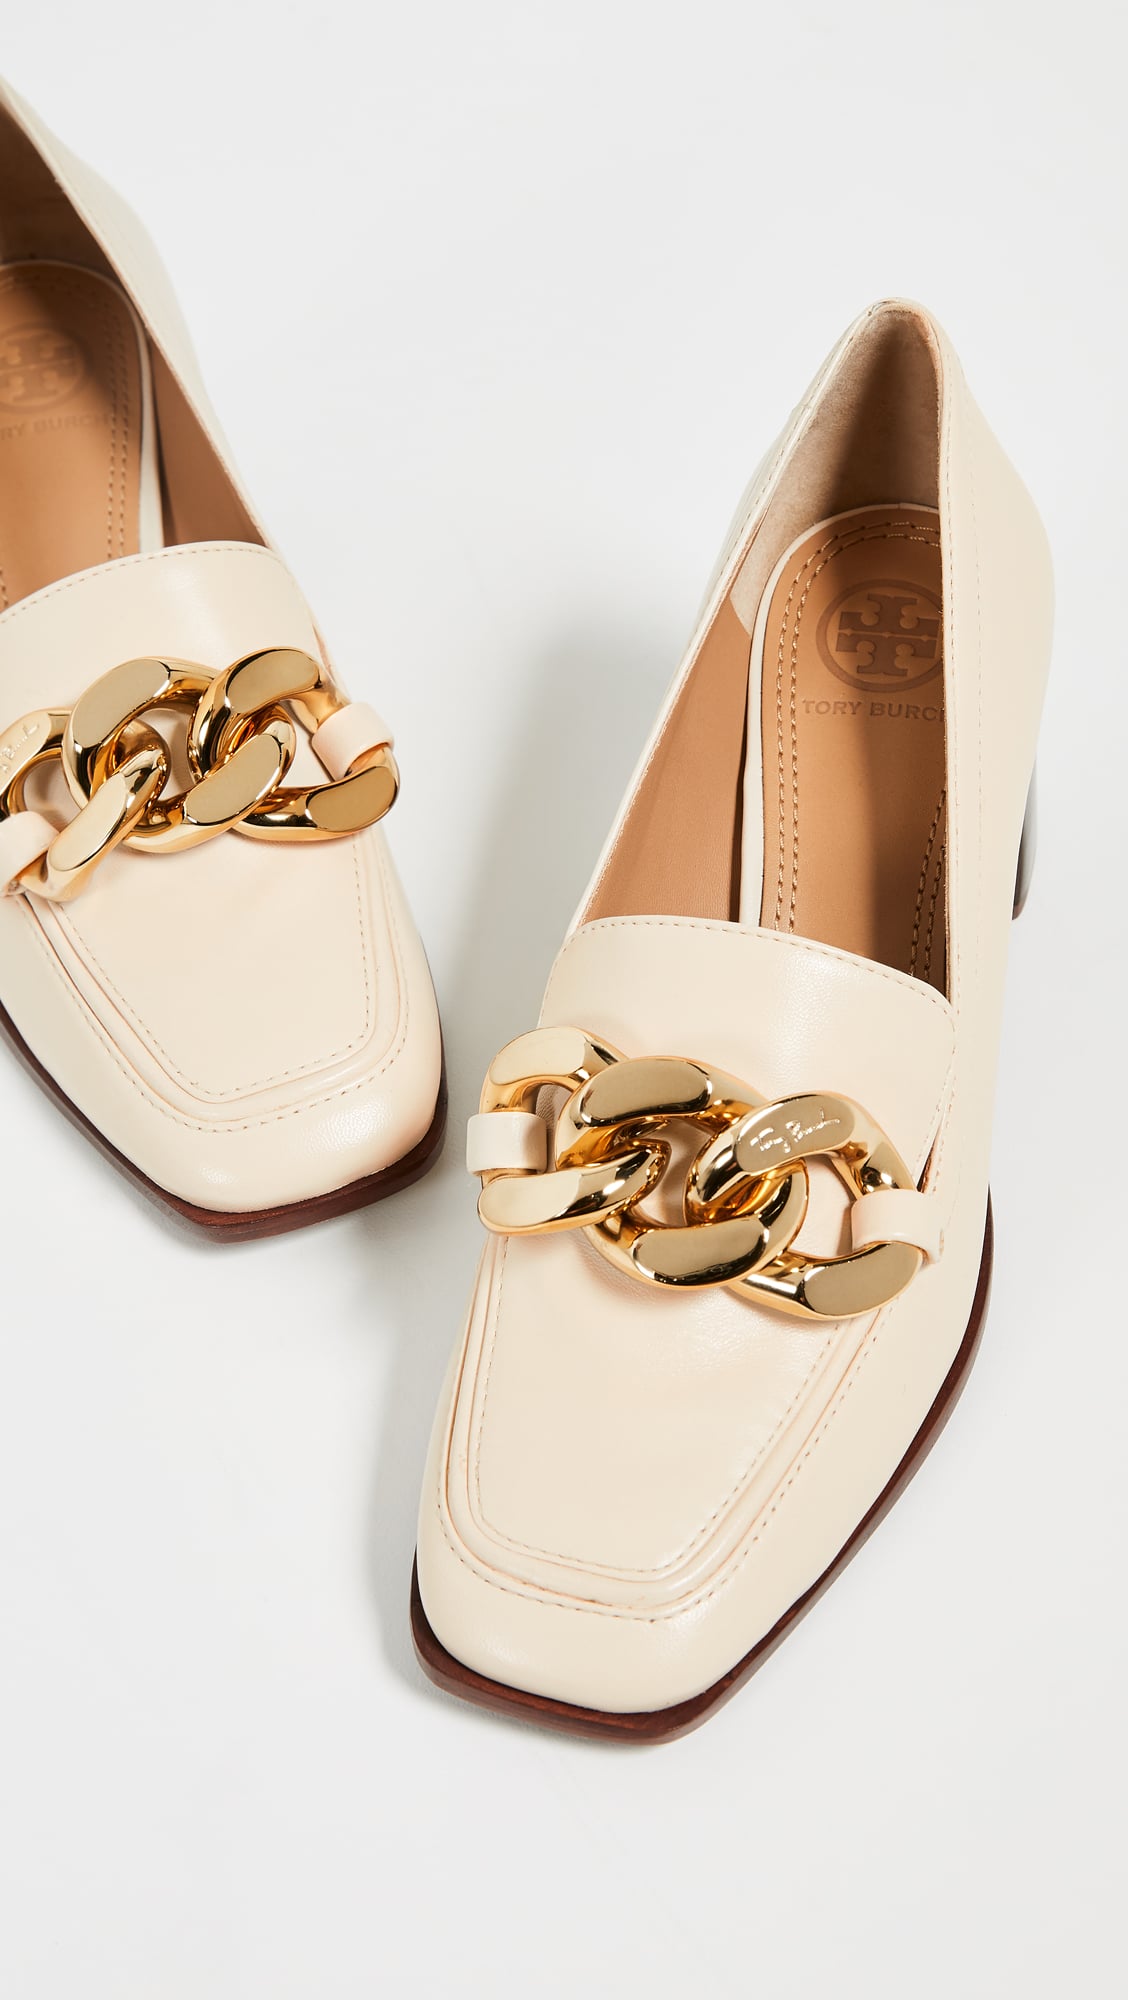 Tory Burch Adrien 65mm Loafers | I Asked For Selena Gomez's Sleek White  Shoes For Christmas, Didn't You? | POPSUGAR Fashion Photo 11